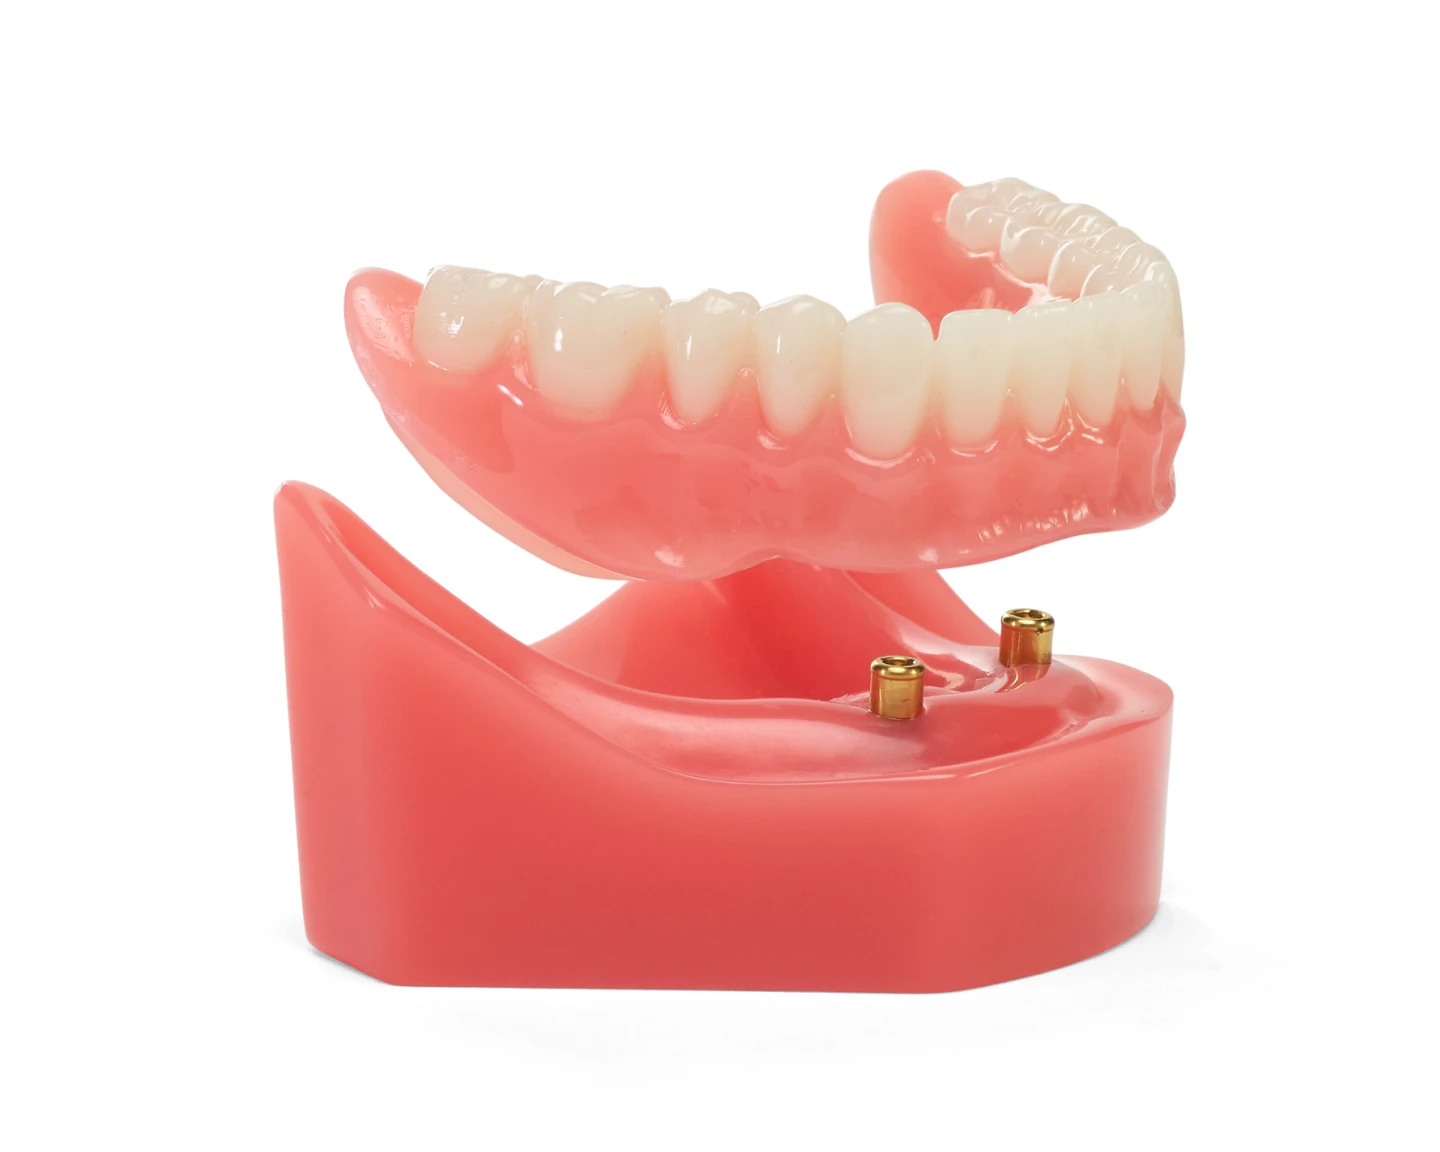 A set of lower dentures with implants on a red gum model.